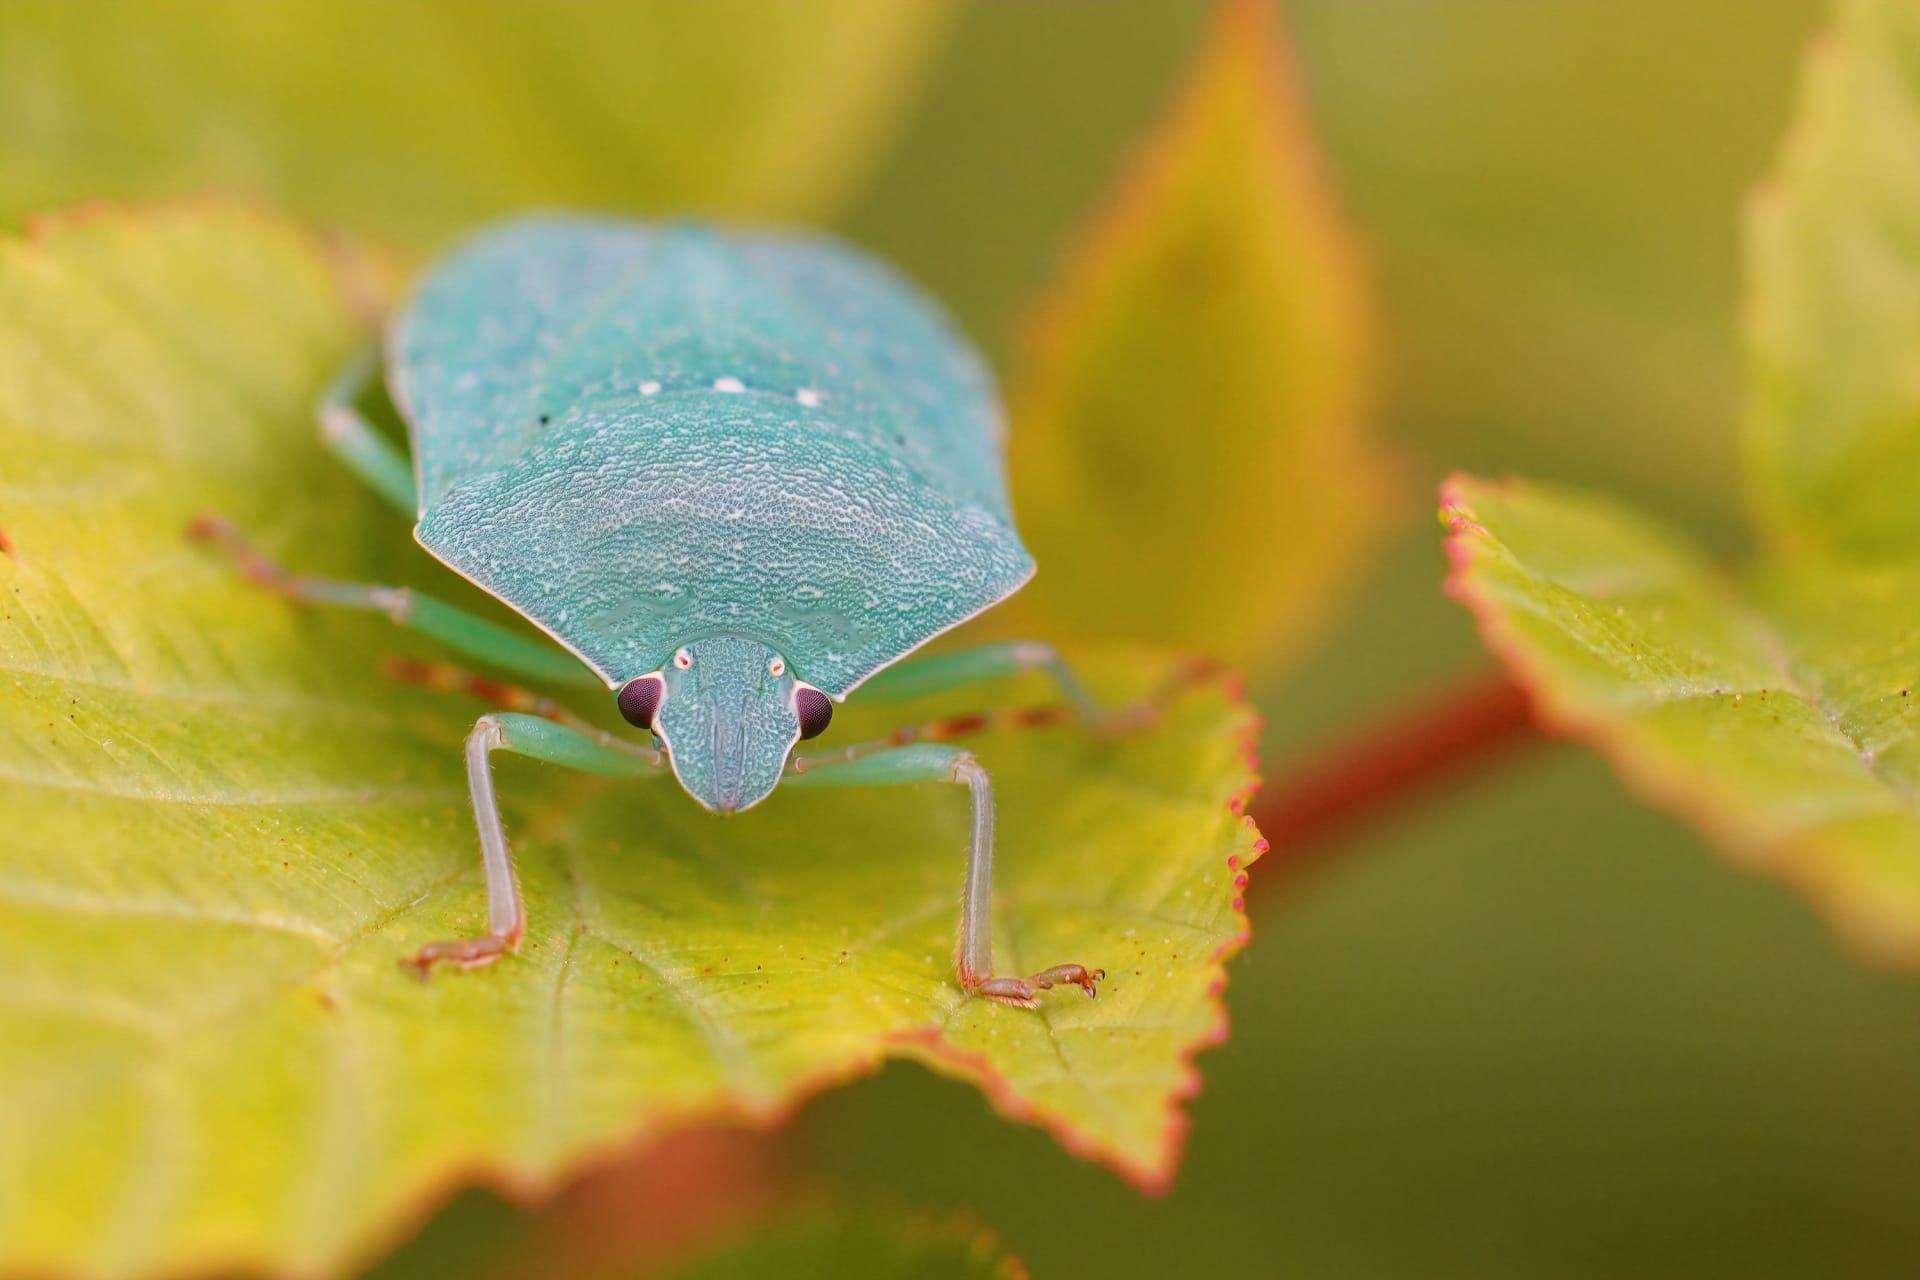 Shield bug pictures